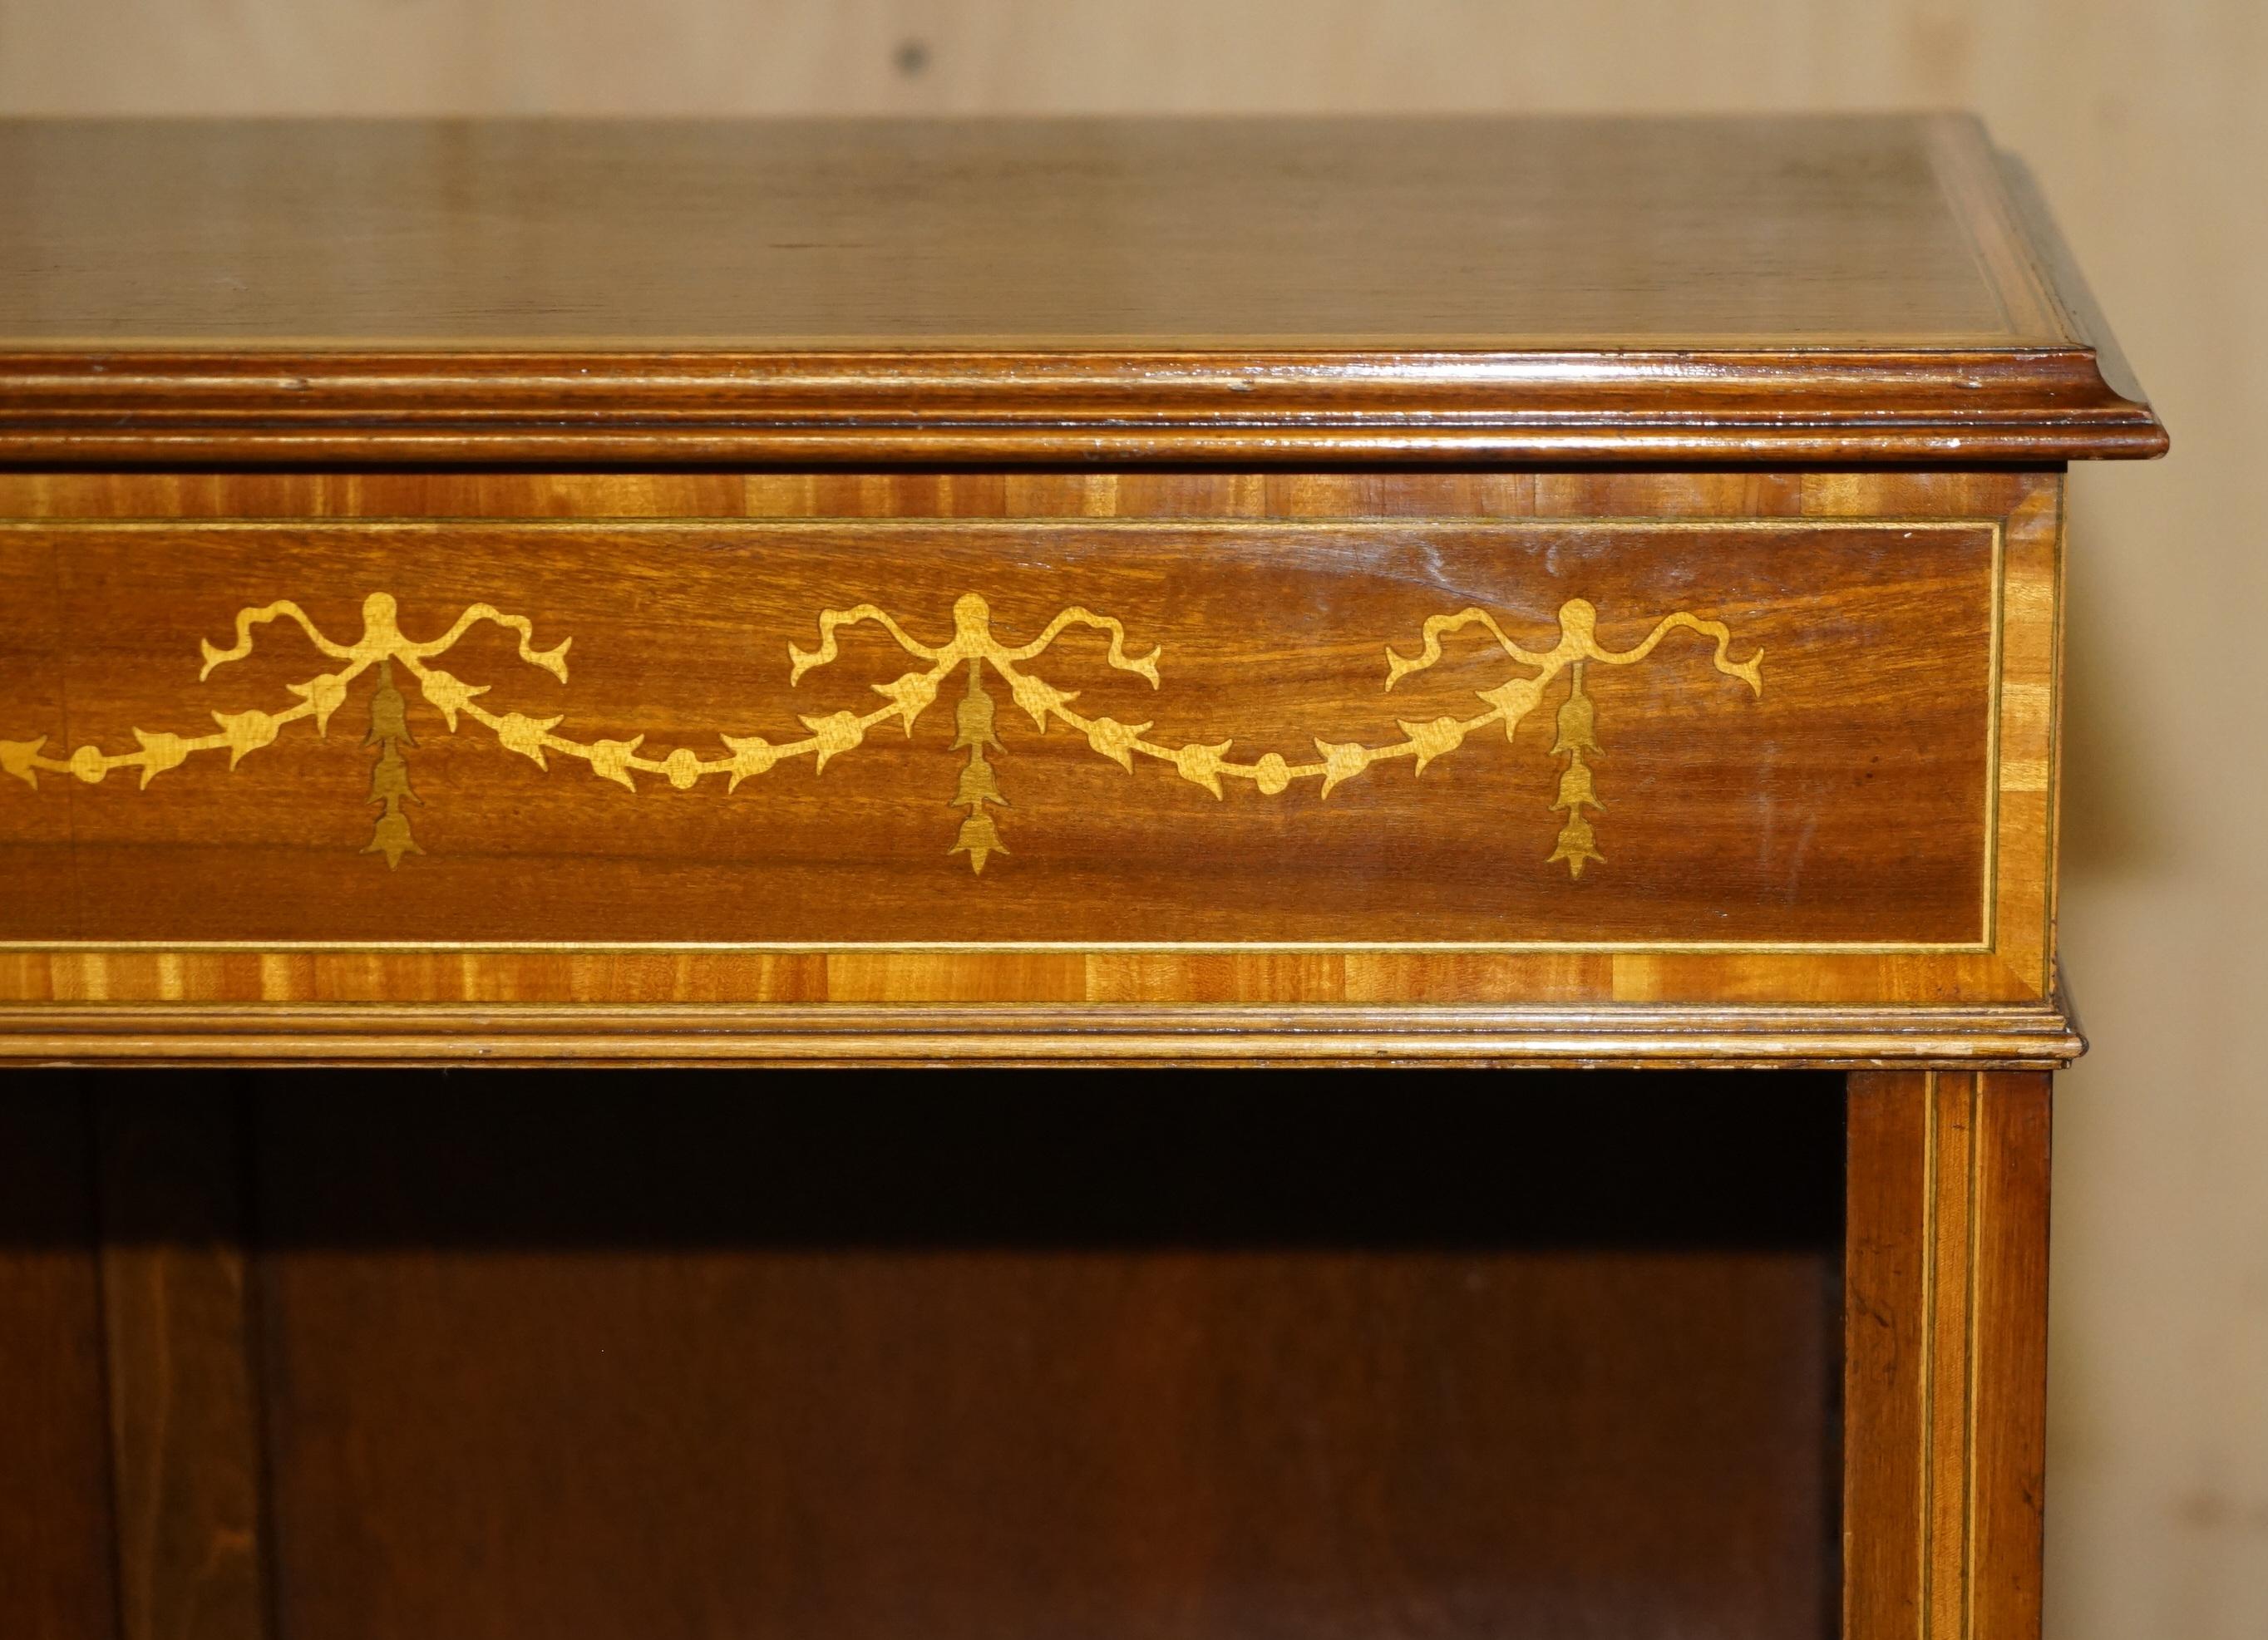 EXQUISITELY INLAID BRiGHTS OF NETTLEBED SHERATON REVIVAL DWARF OPEN BOOKCASE For Sale 2